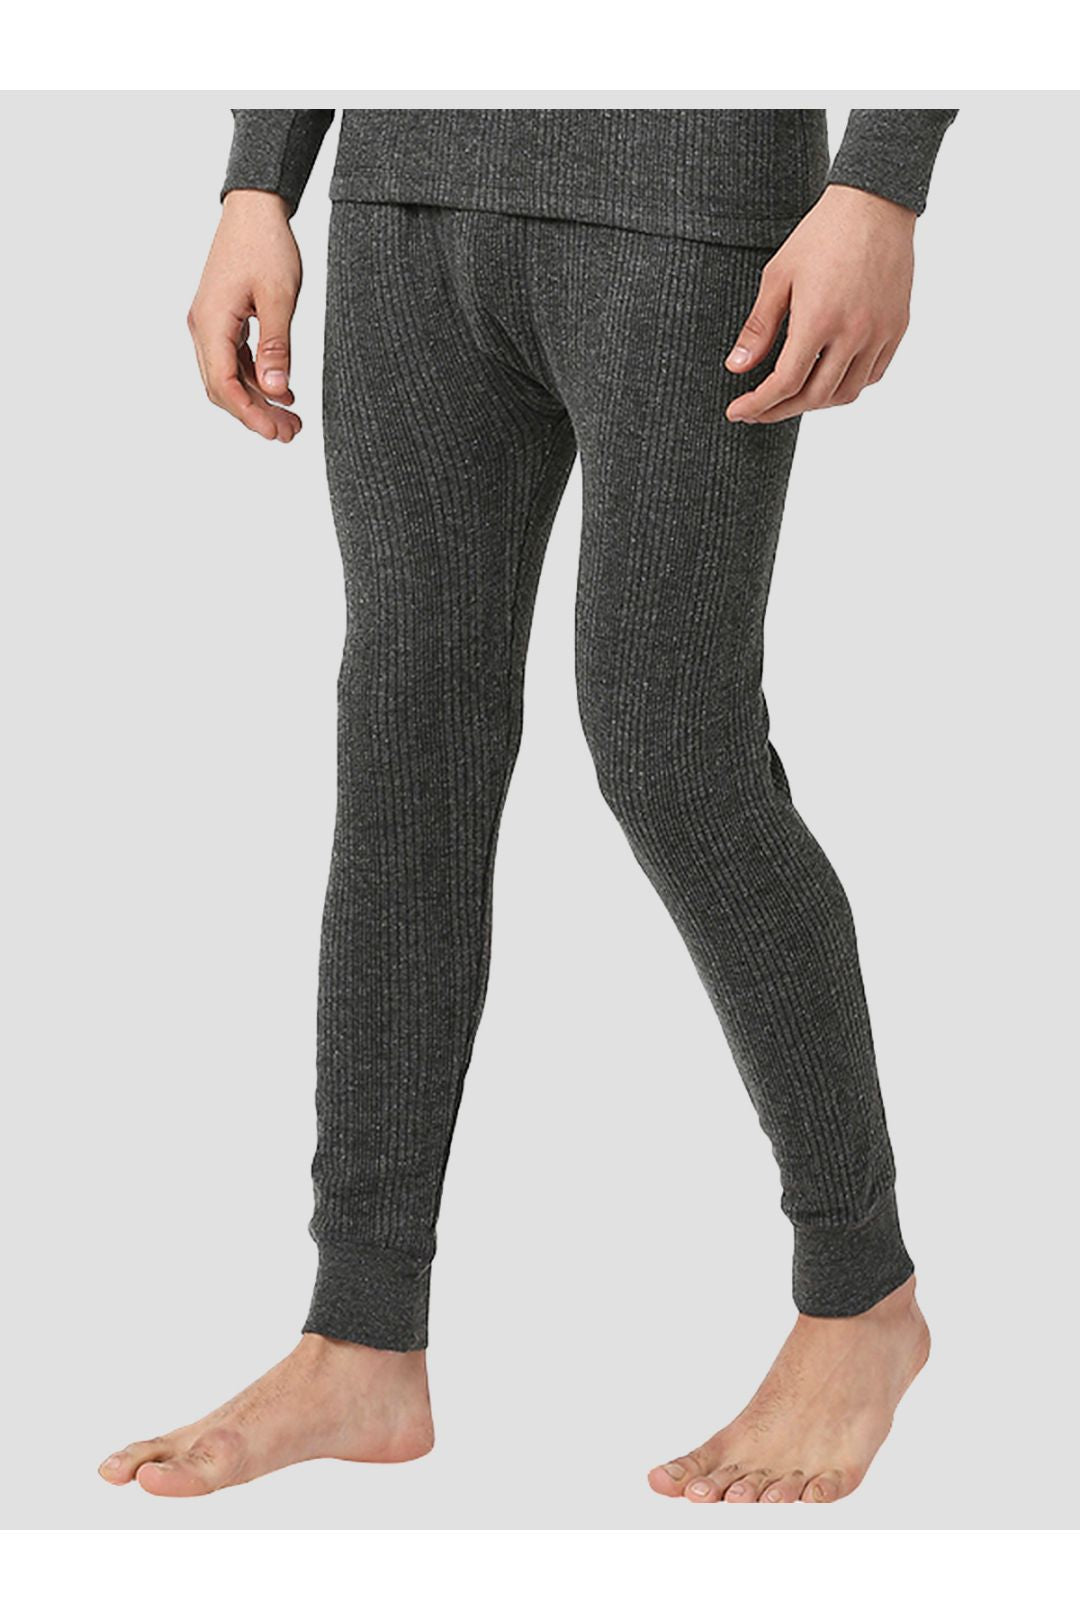 Winter Must Have // Fleece lined tights - Extra Petite